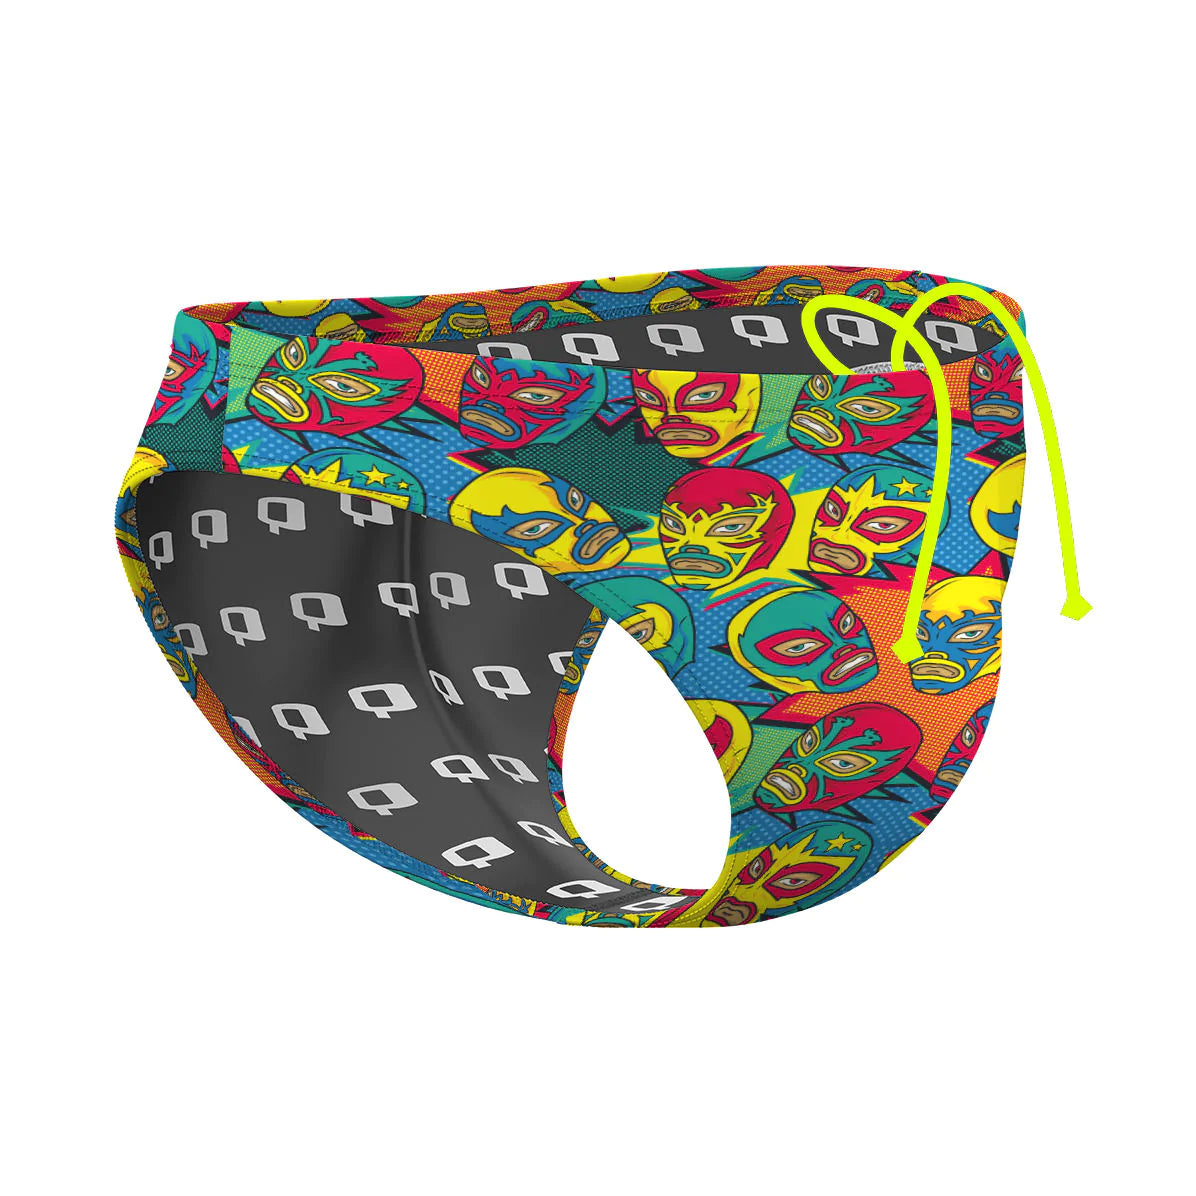 Comic Wrestling Masks - Waterpolo Brief Swimsuit